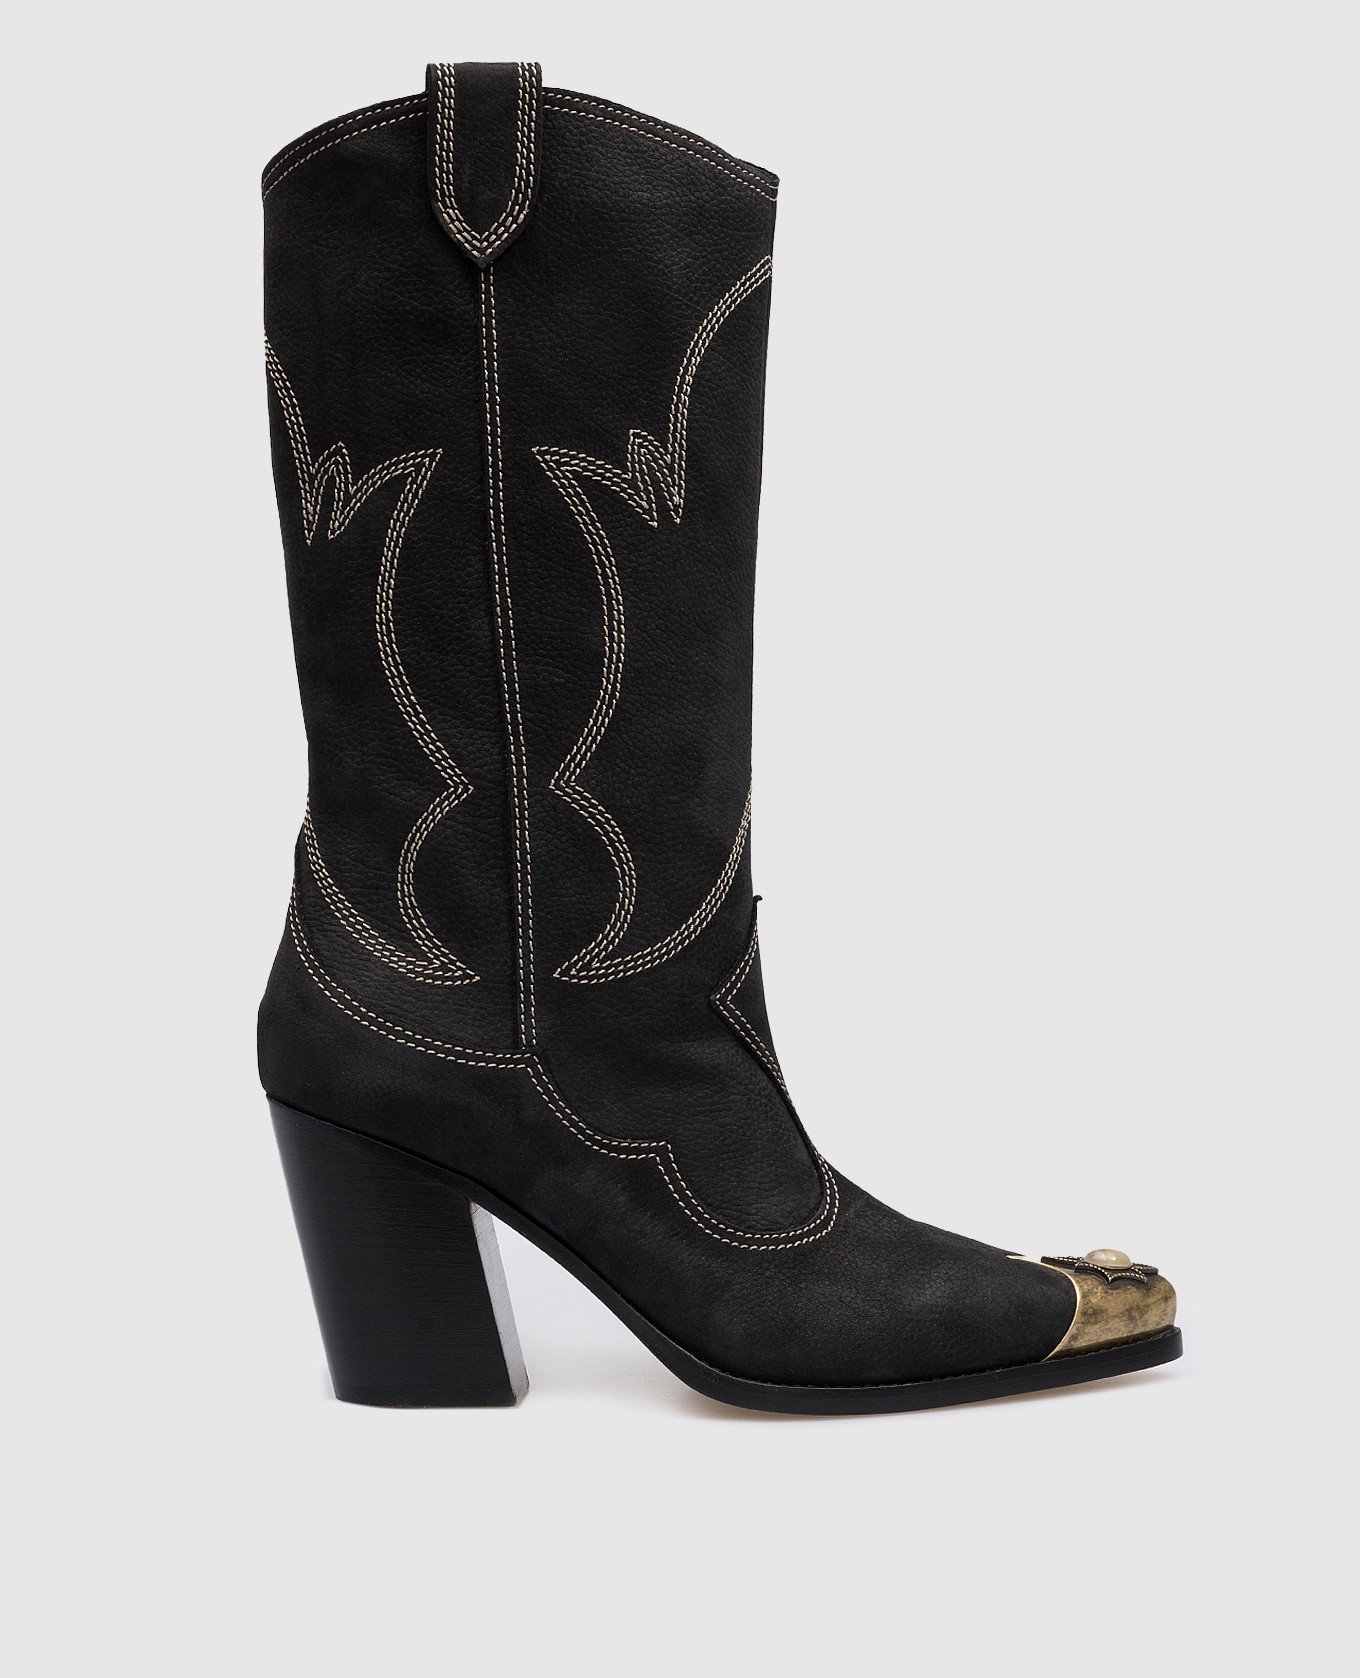 Black leather boots with metal trim